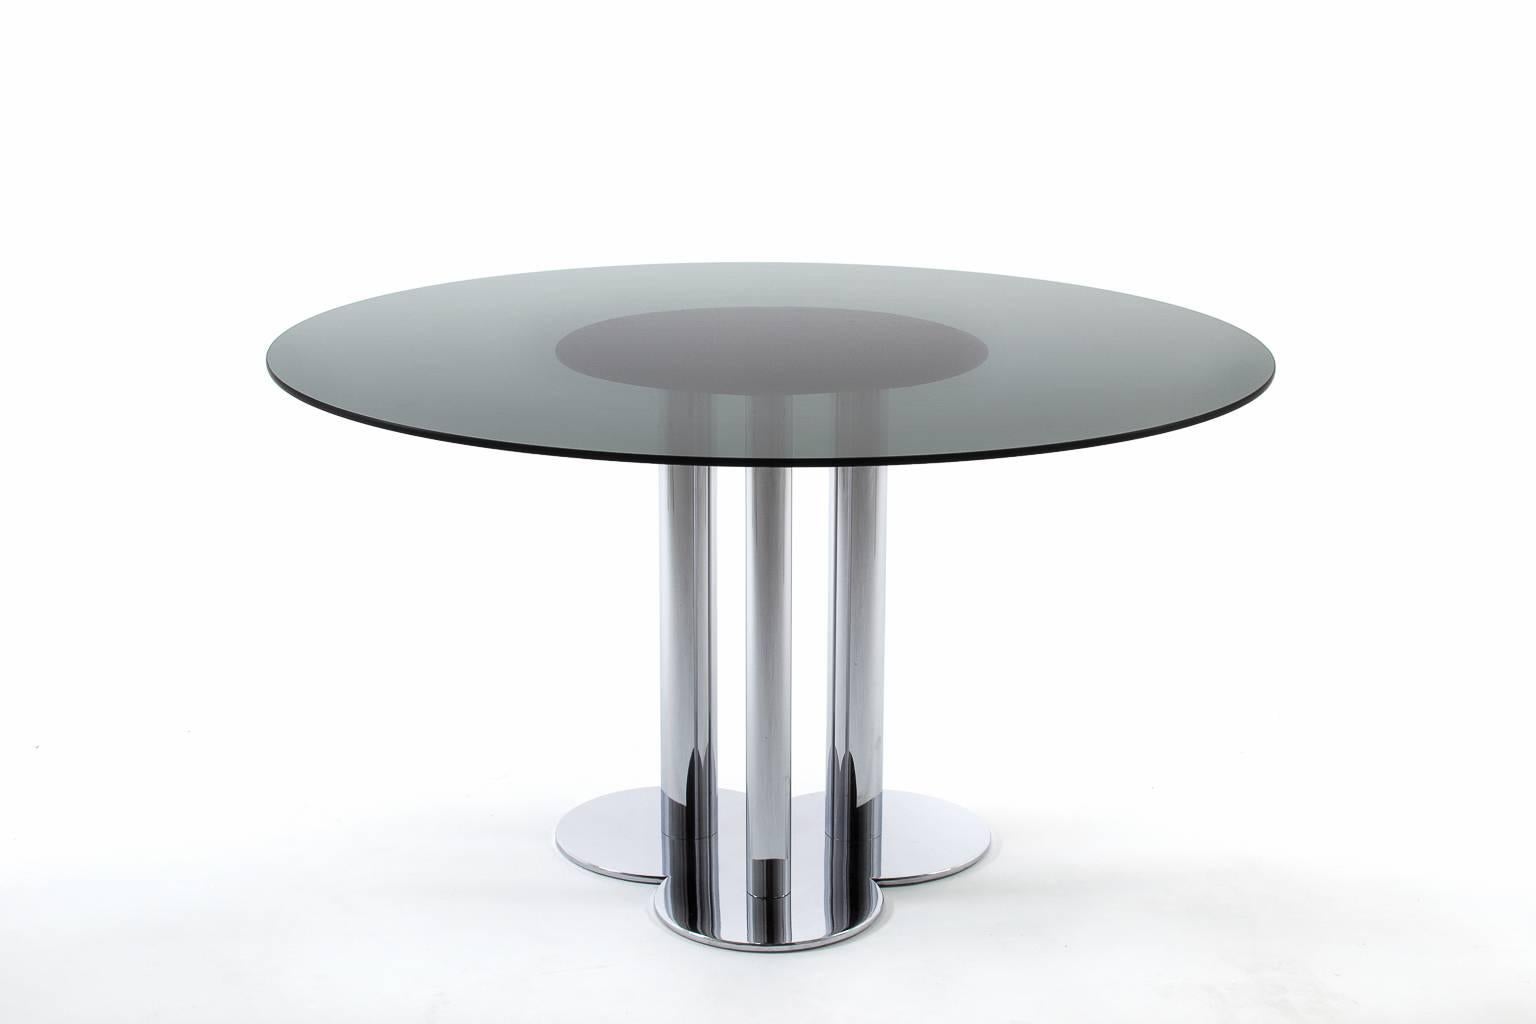 Trifoglio dining table by Sergio Asti for Poltronova, Italy, 1968. High quality chrome-plated base with three lobed segments and support columns that are varying widths. The chrome matches very good with the 15 mm thick metal blue toned glass. The